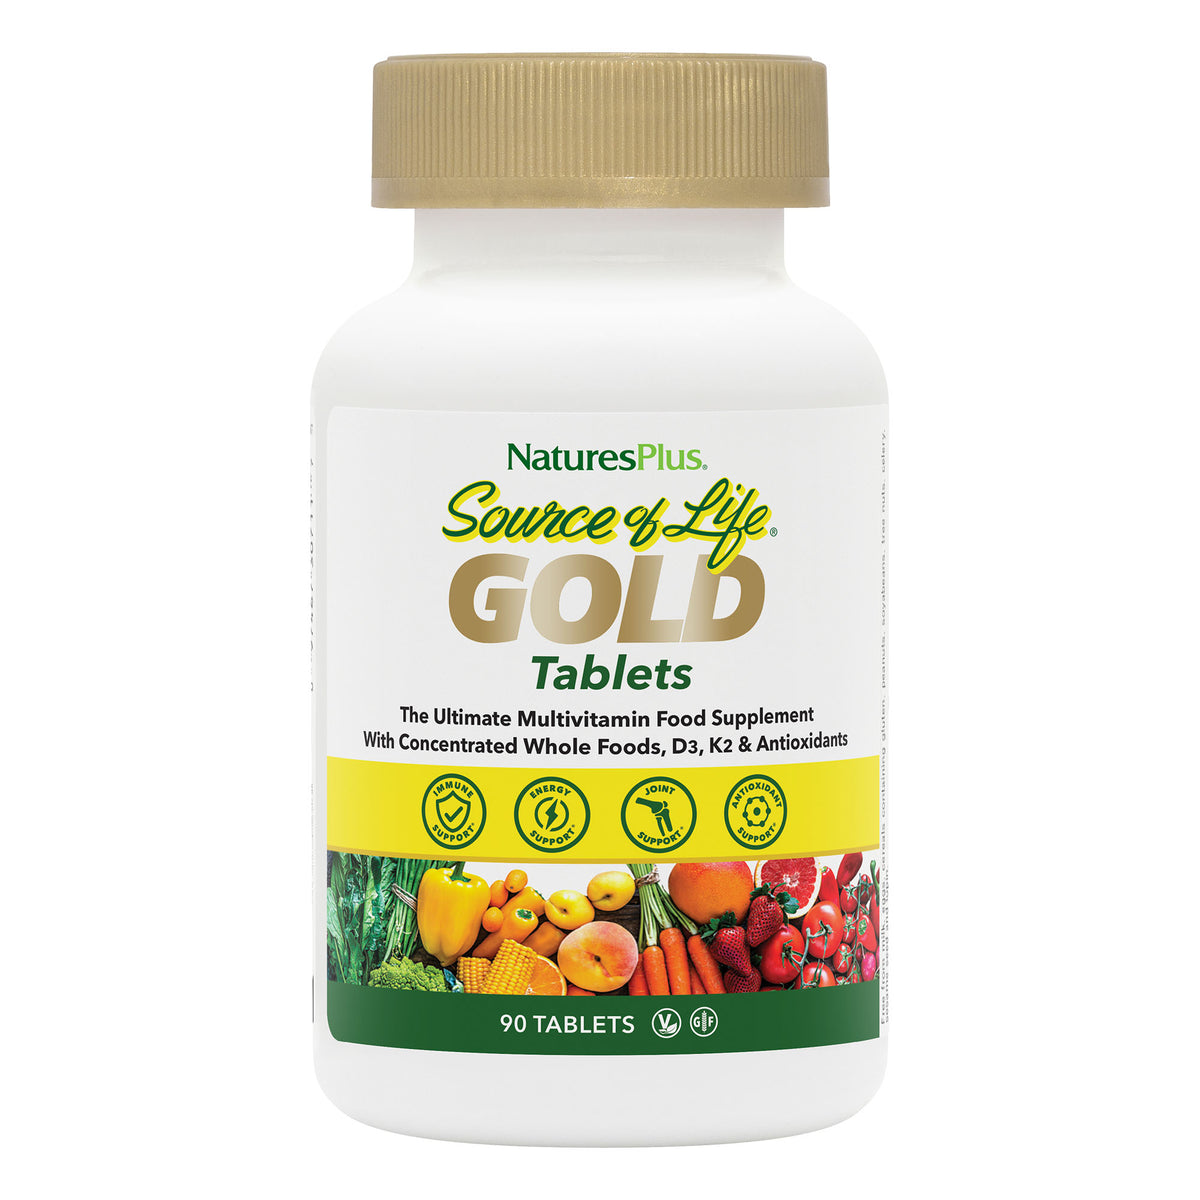 product image of Source of Life® GOLD Multivitamin Tablets containing 90 Count